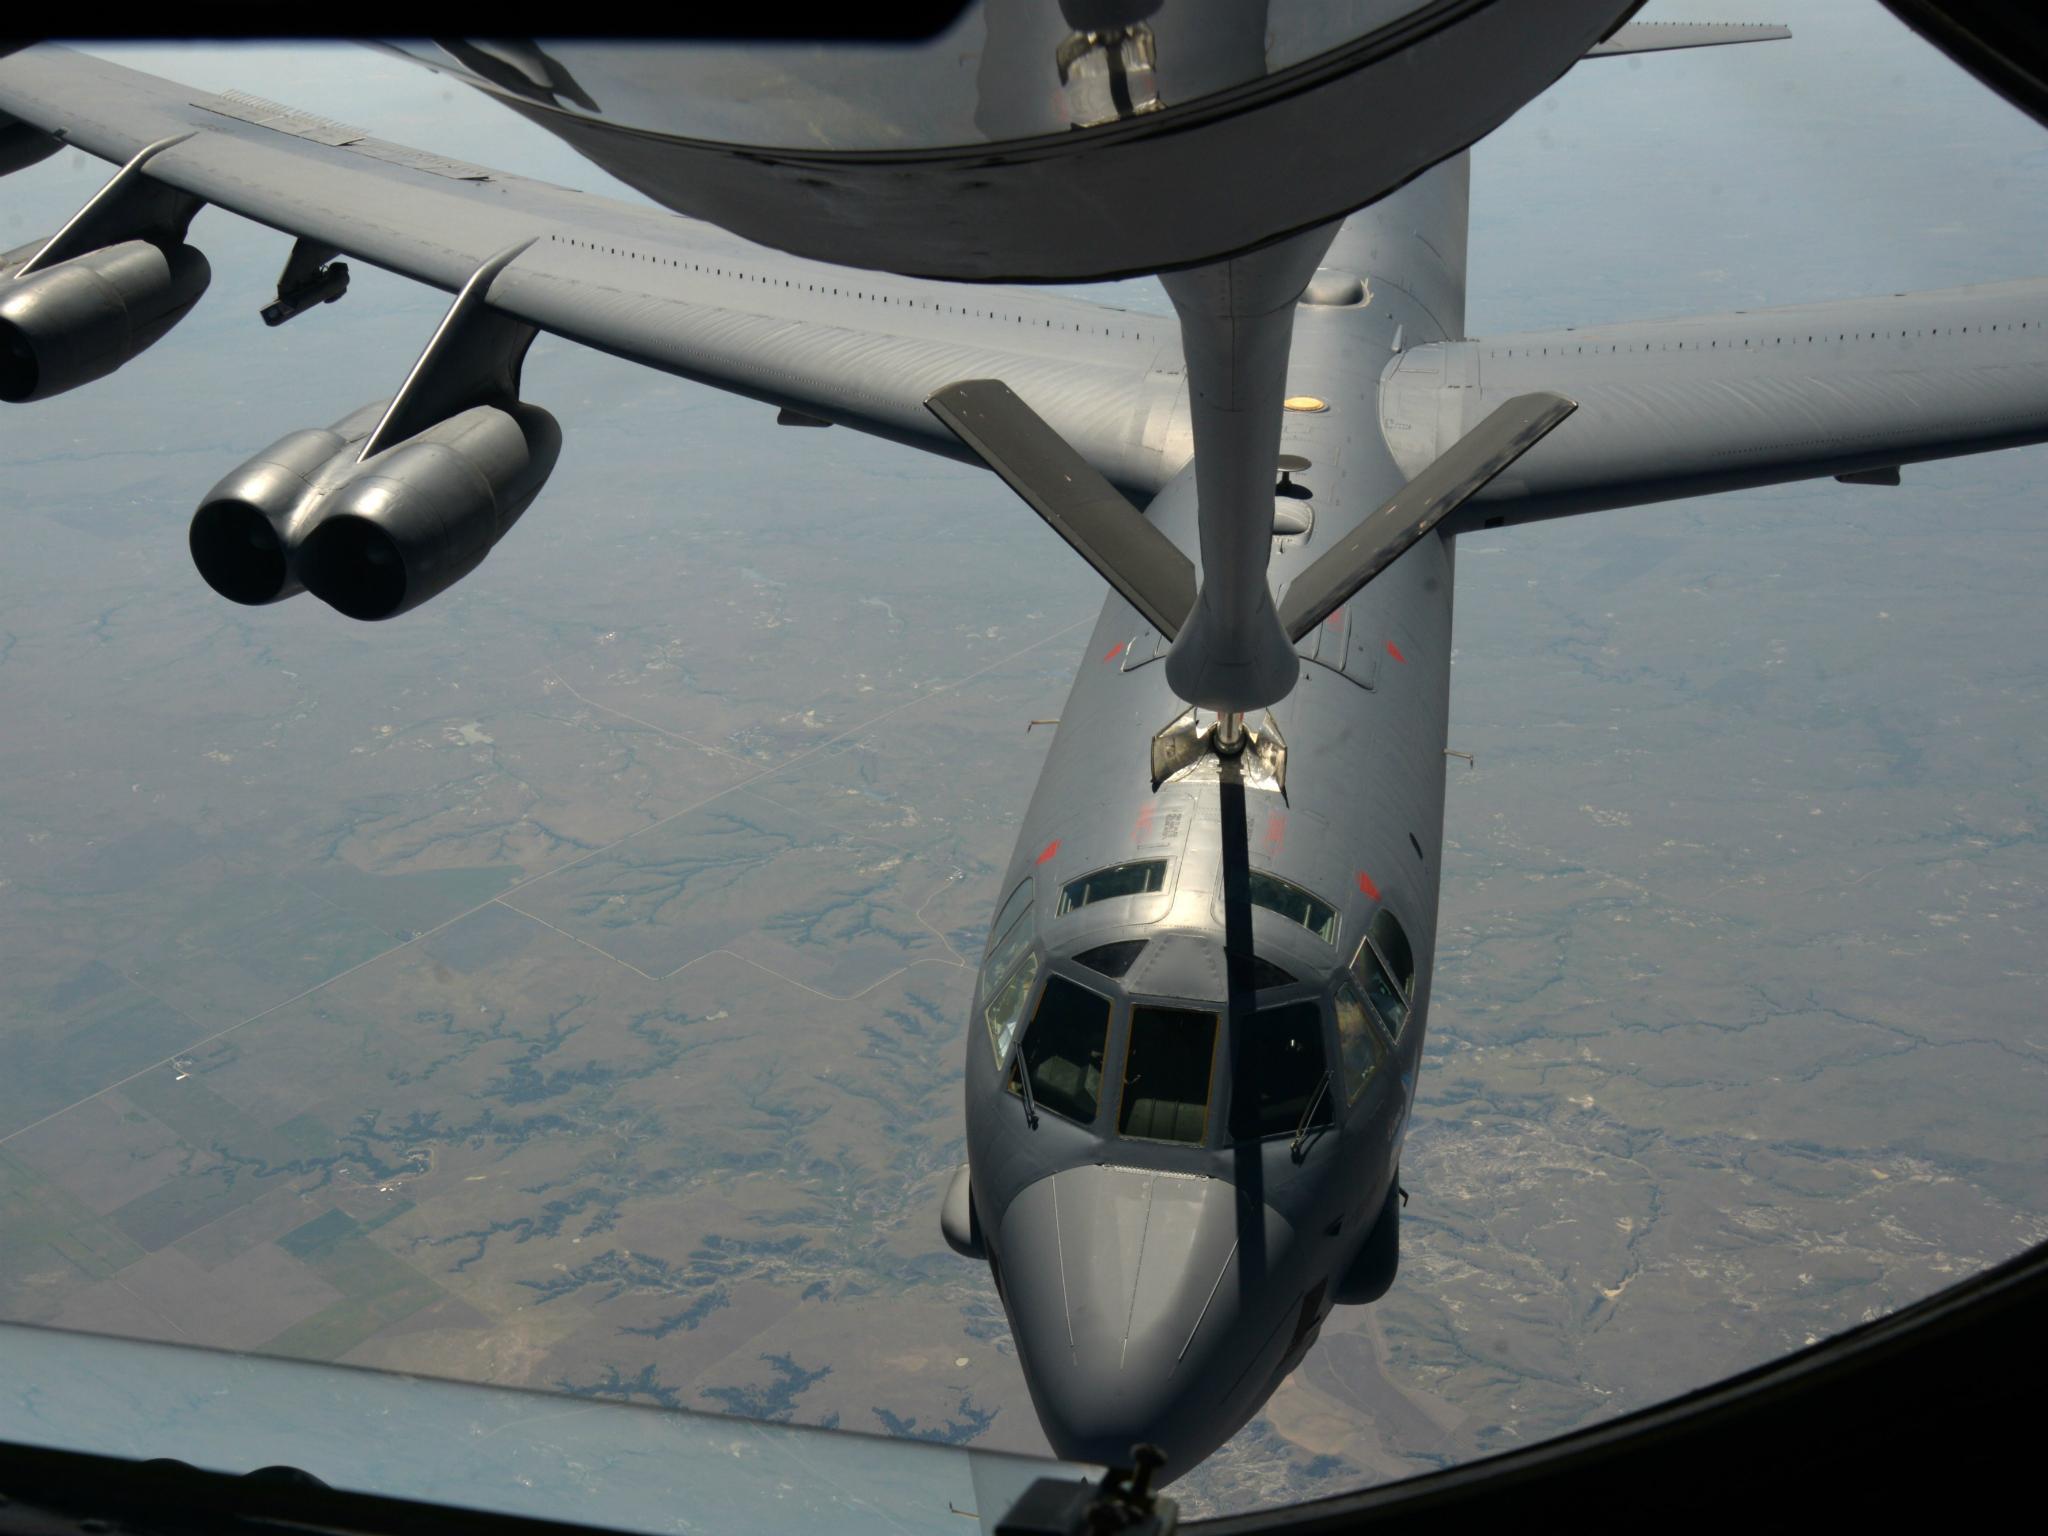 General Everhart also wants to fit Air Mobility Command tankers with lasers capable of destroying ground-to-air missiles